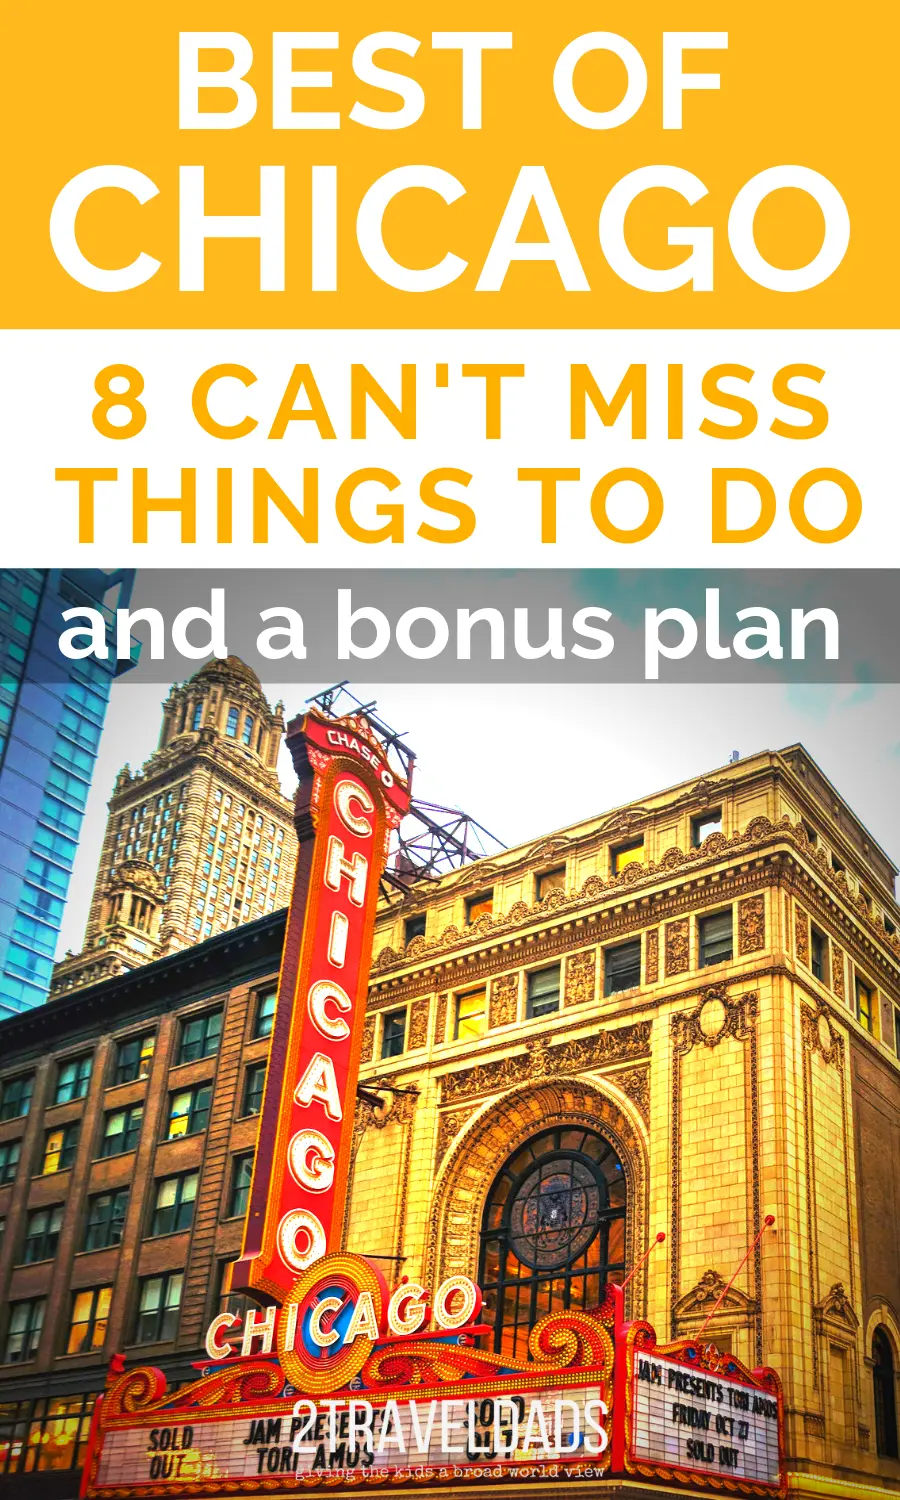 8 unforgettable activities for when you're traveling to Chicago (including a bonus plan) for exploring the city and seeing the best of the best. Art, Chicago architecture, when to stay and more. #Chicago #city #vacation #thingstodo